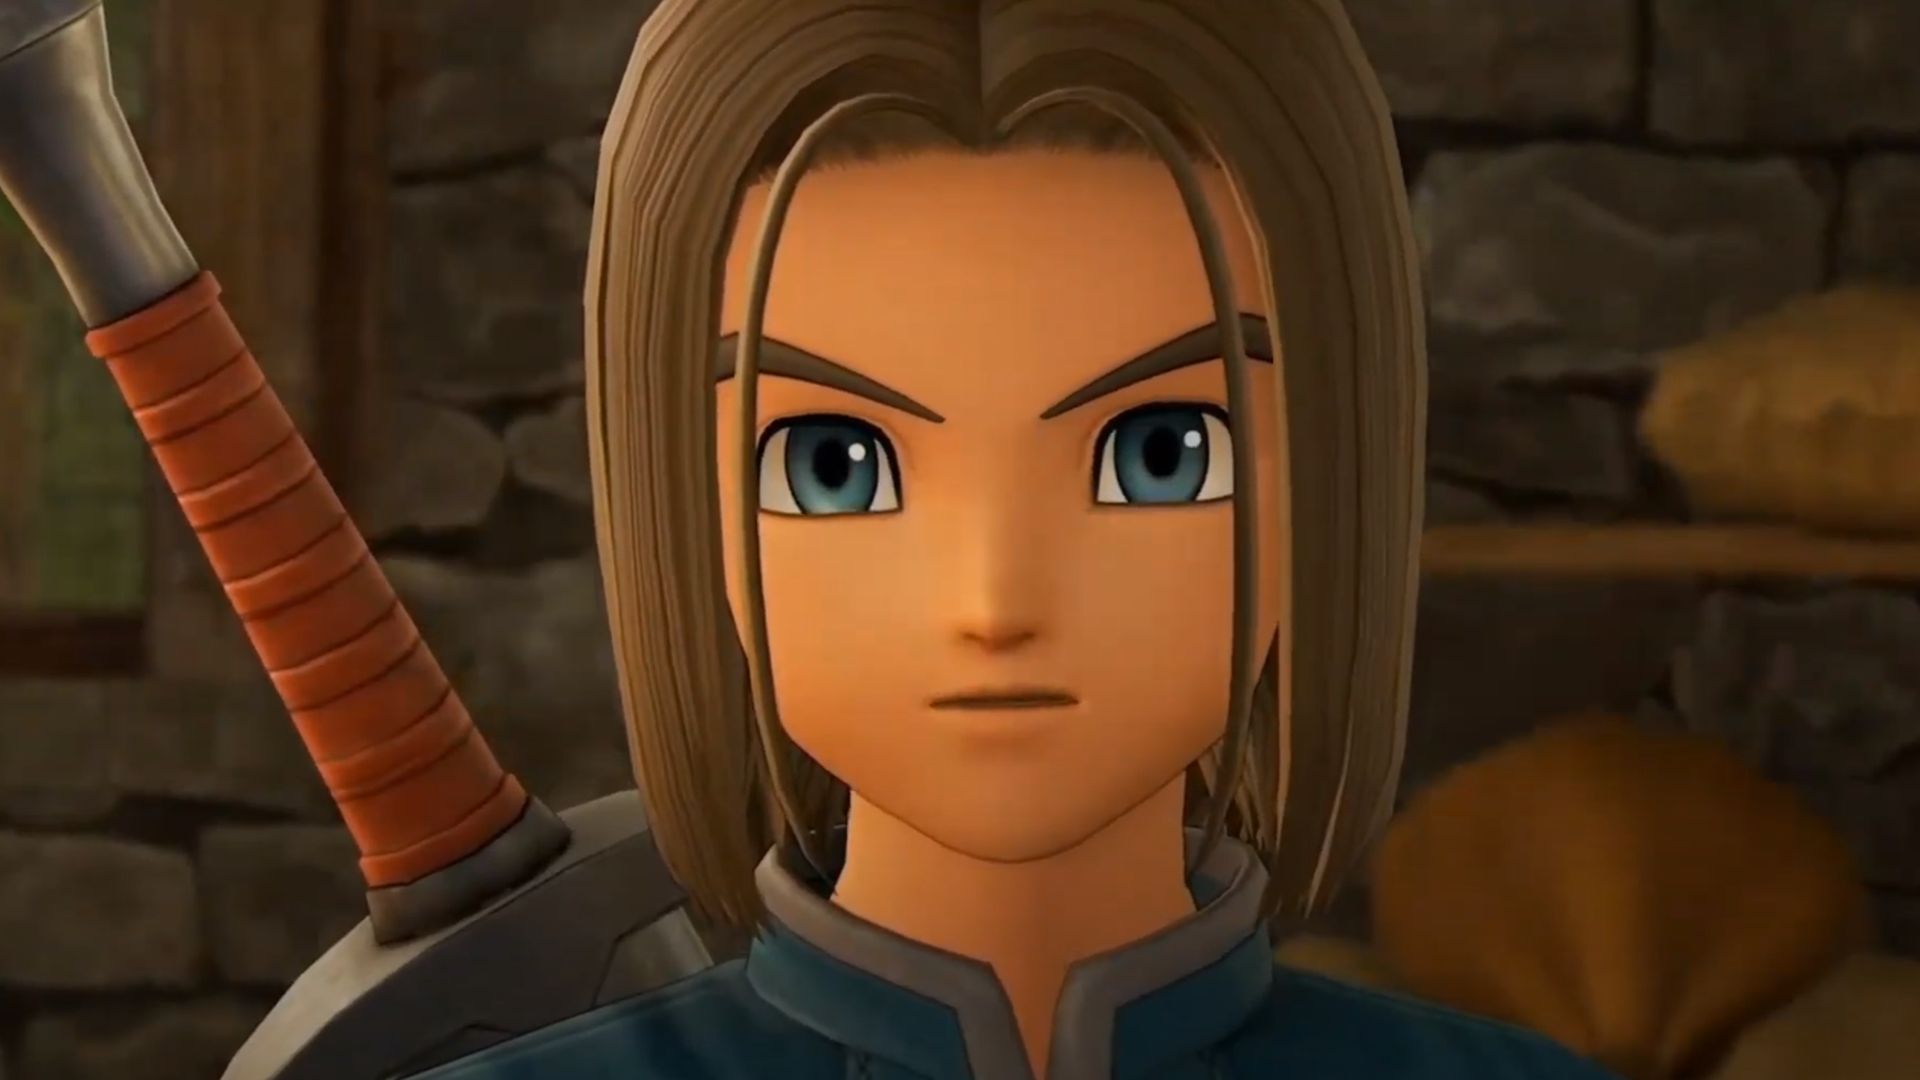 Dragon Quest 11 S Is Coming To Pc And It Ll Be On Game Pass Pcgamesn